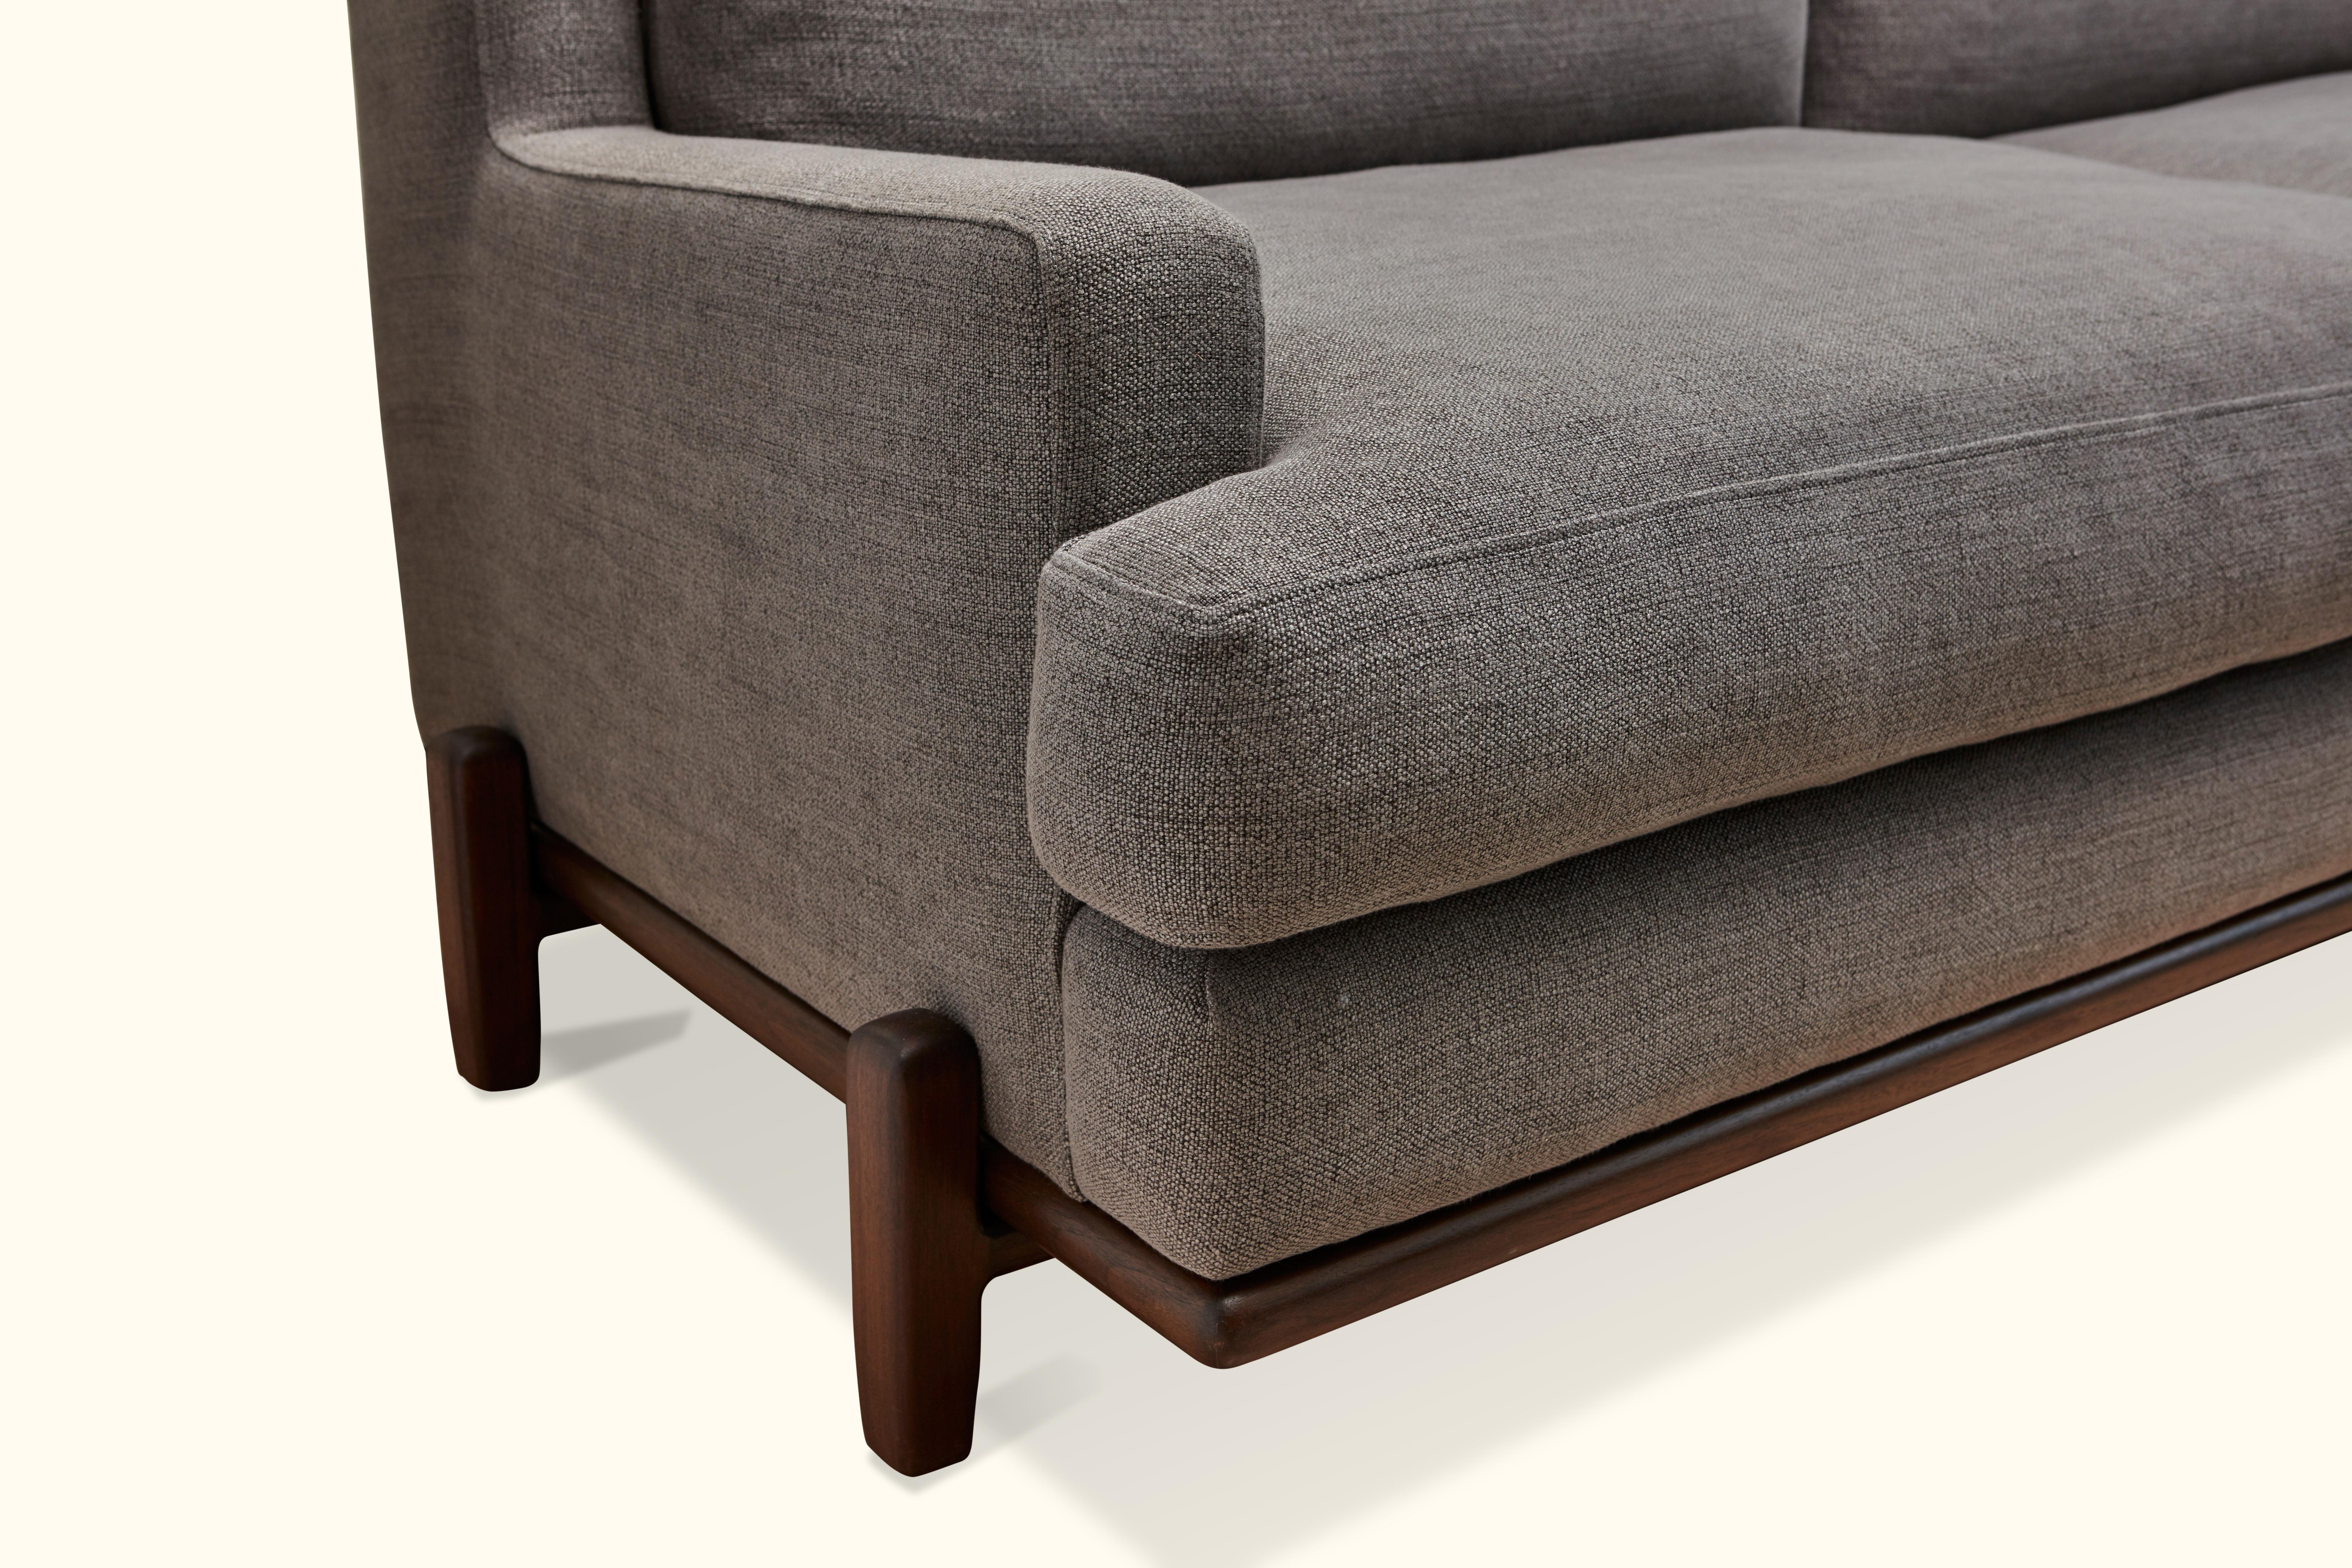 American George Sofa by Brian Paquette for Lawson-Fenning